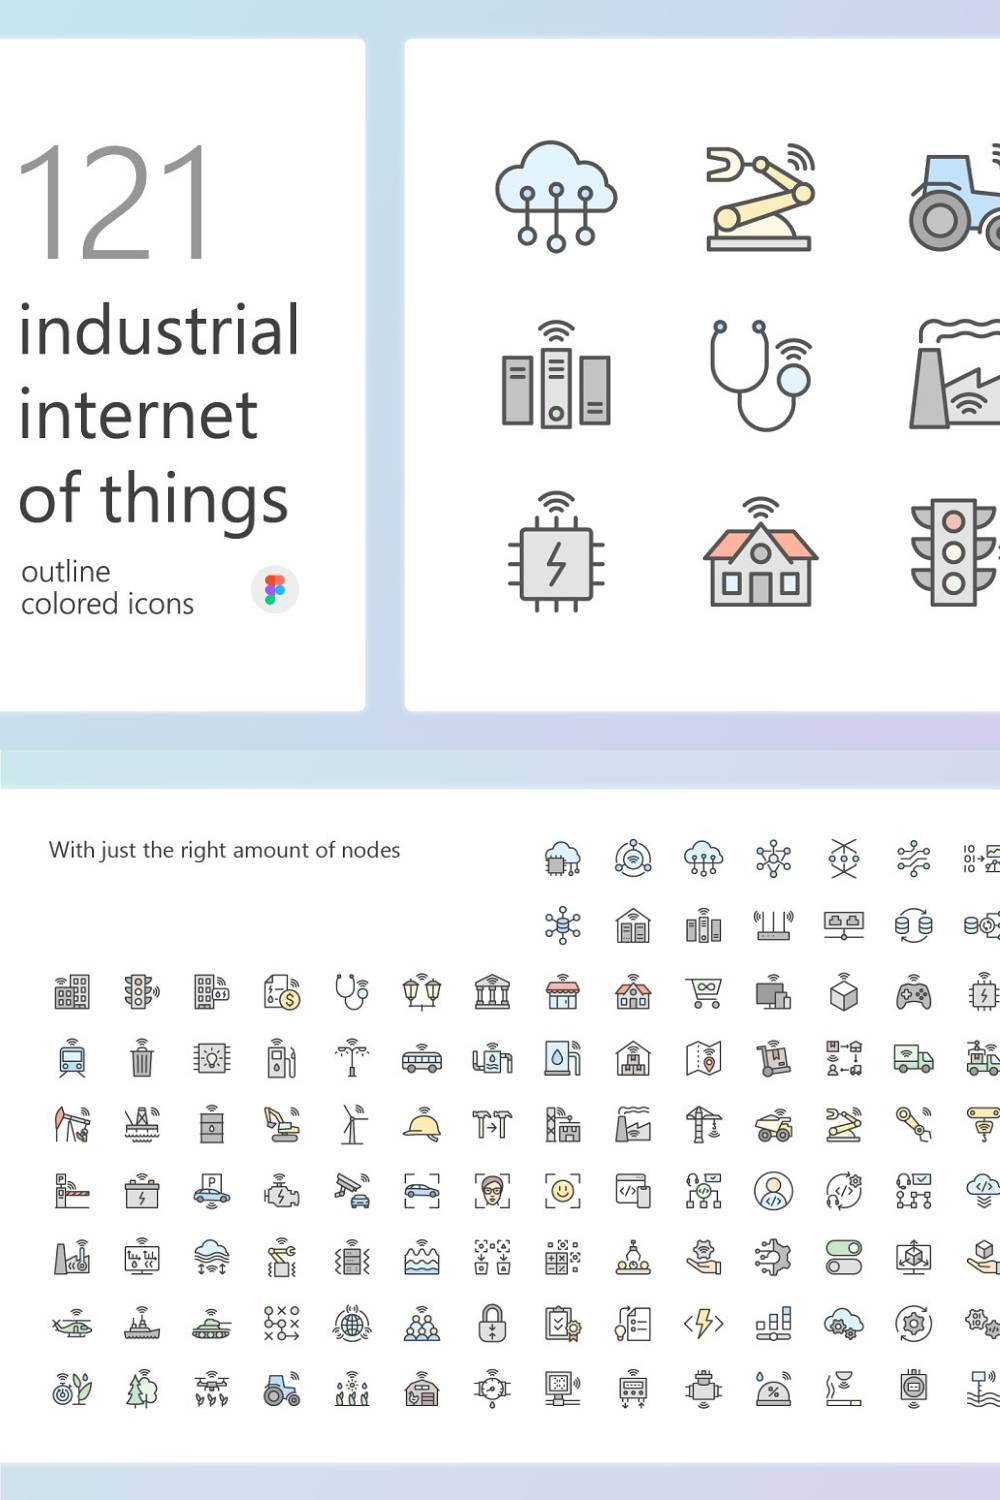 Iiot Outline Colored Iconset Pinterest Cover.